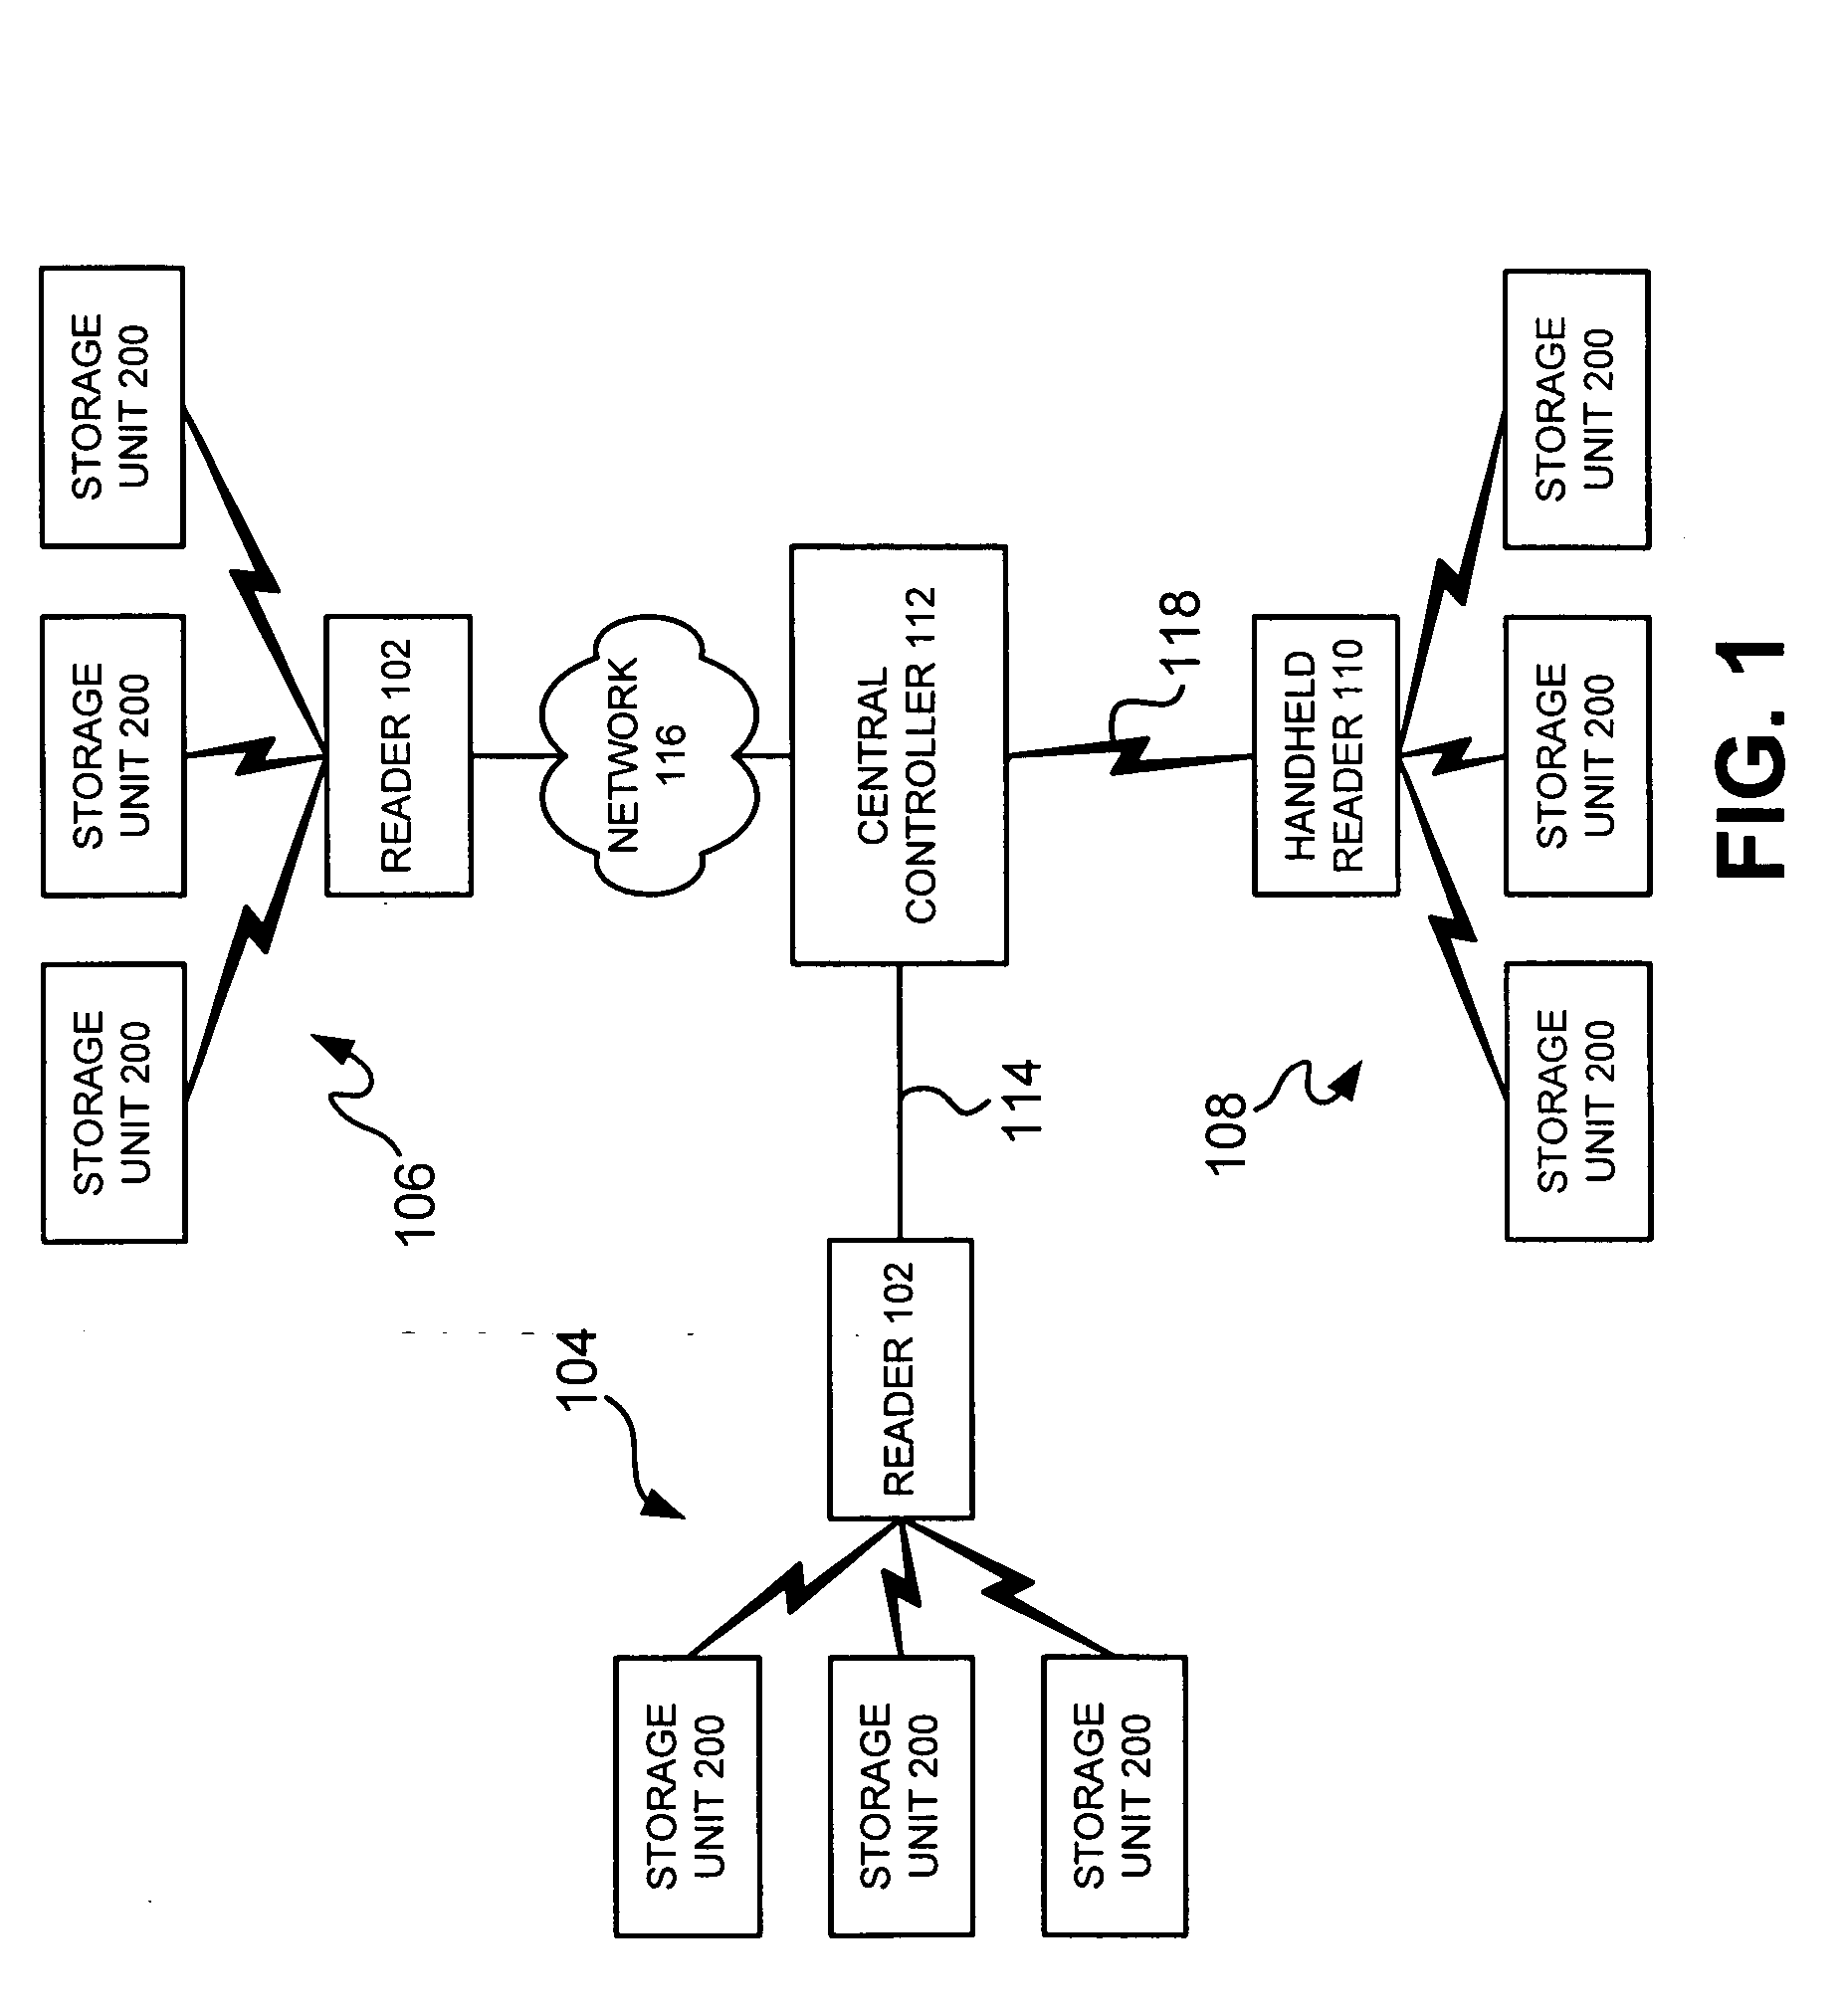 System, method, and computer program product for monitoring inventory